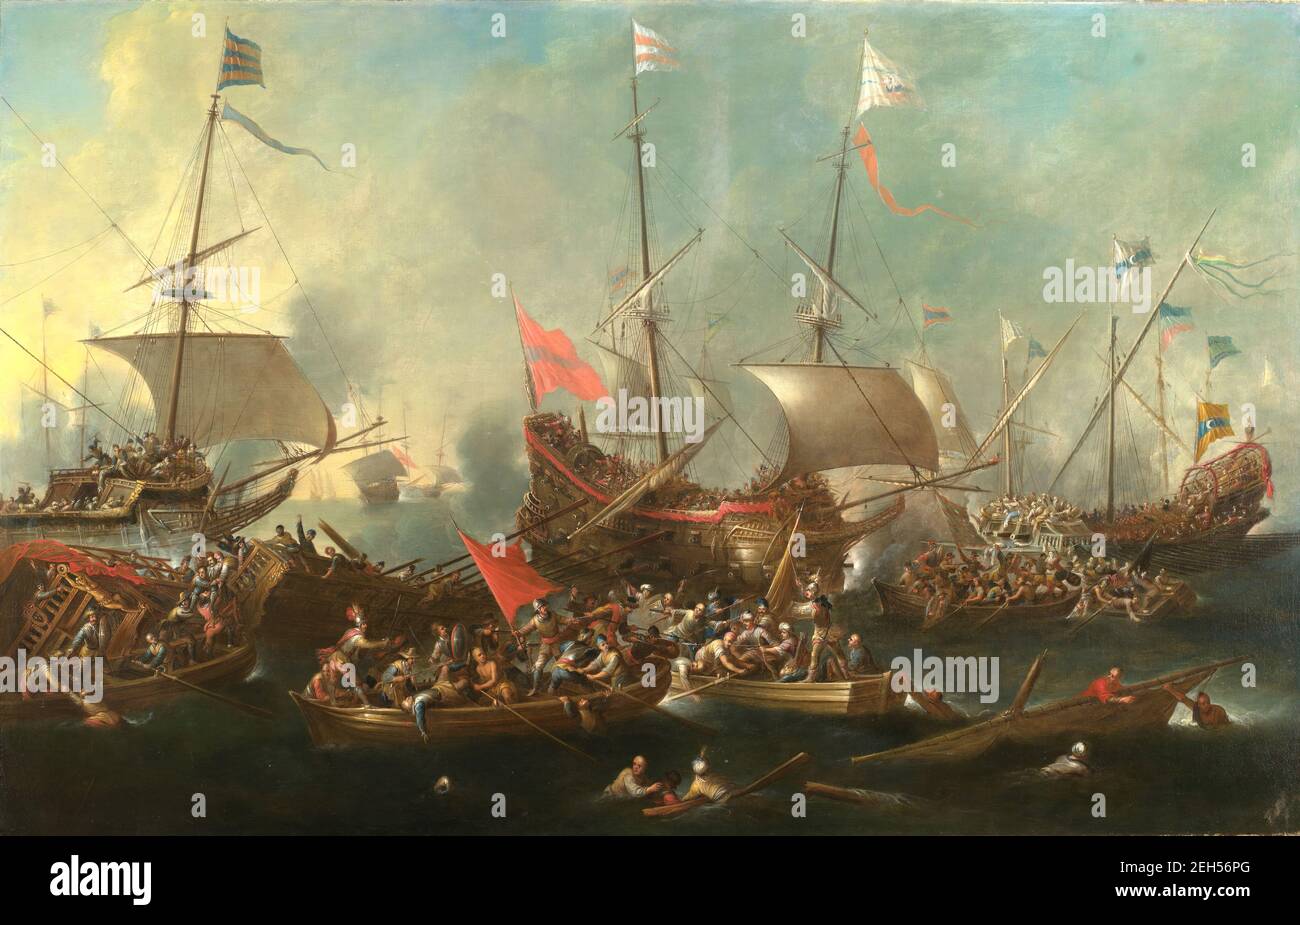 The Battle of Lepanto - A Sea Battle between Christians and Barbary Corsairs, 1615-20. The Battle of Lepanto was fought between the Holy League, a coalition of Catholic Mediterranean states, and the Turkish Ottoman Empire on 7th October 1571. The Holy League force, led by Don Juan de Austria (1547-78), were victorious against the Ottoman force including Barbary Corsairs led by Muezzinzade Ali Pasha. This was the last great sea battle involving oared vessels and the largest battle of galleys since Actium in 30BC. Stock Photo